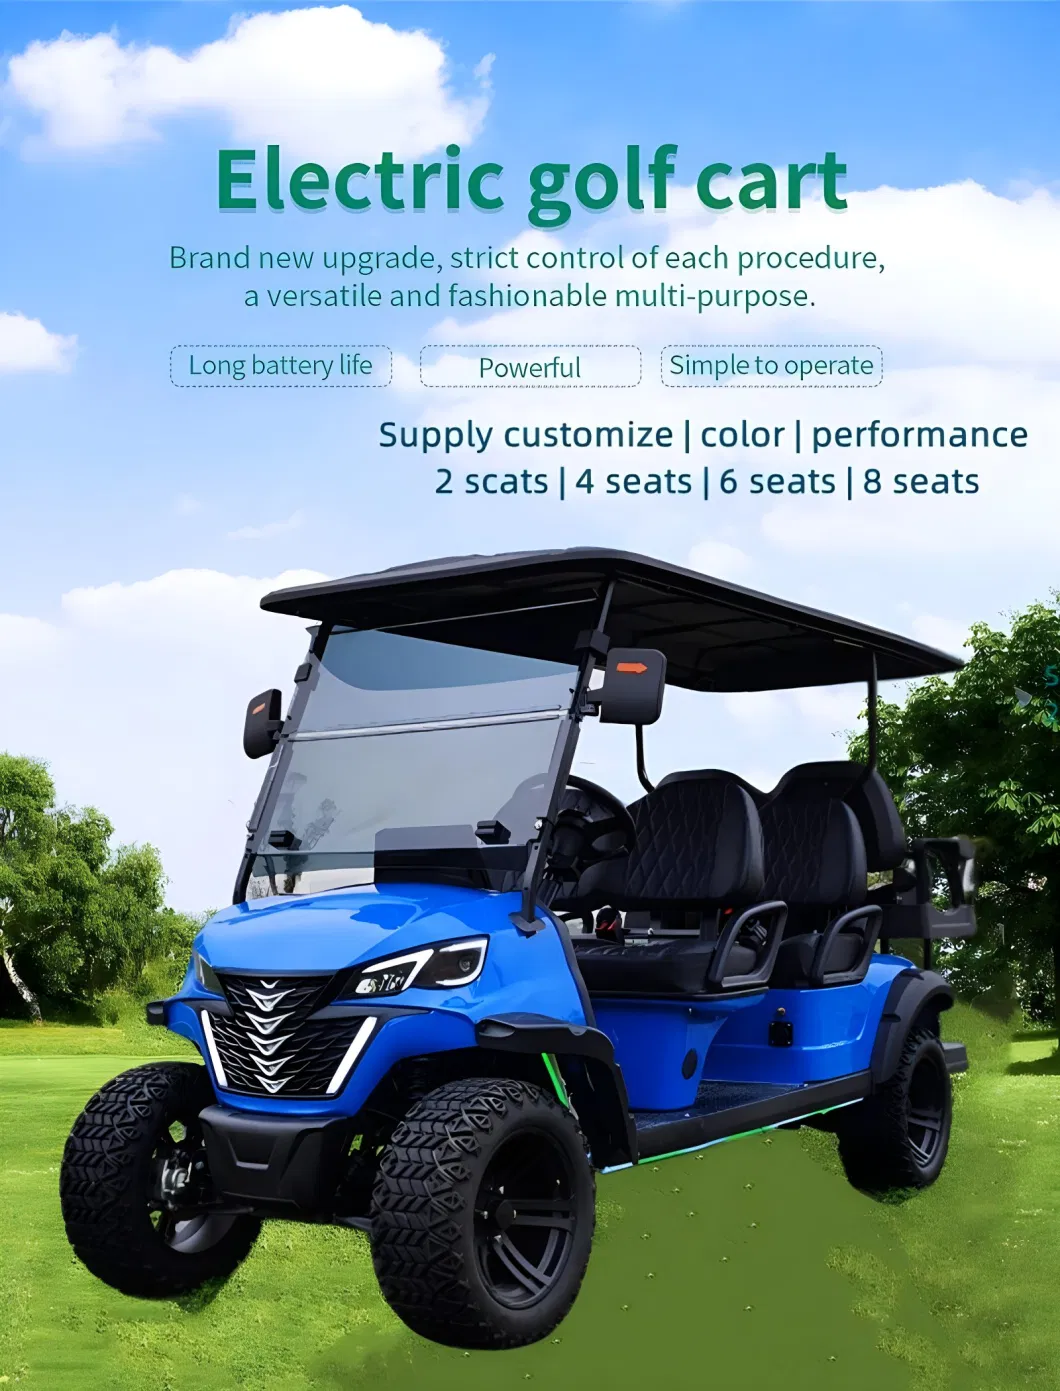 Surprise Price Latest Design Original 4 Seater High Chassis Customized Electric Carts Body Kit Trailers Icon Golf Cart on Sale